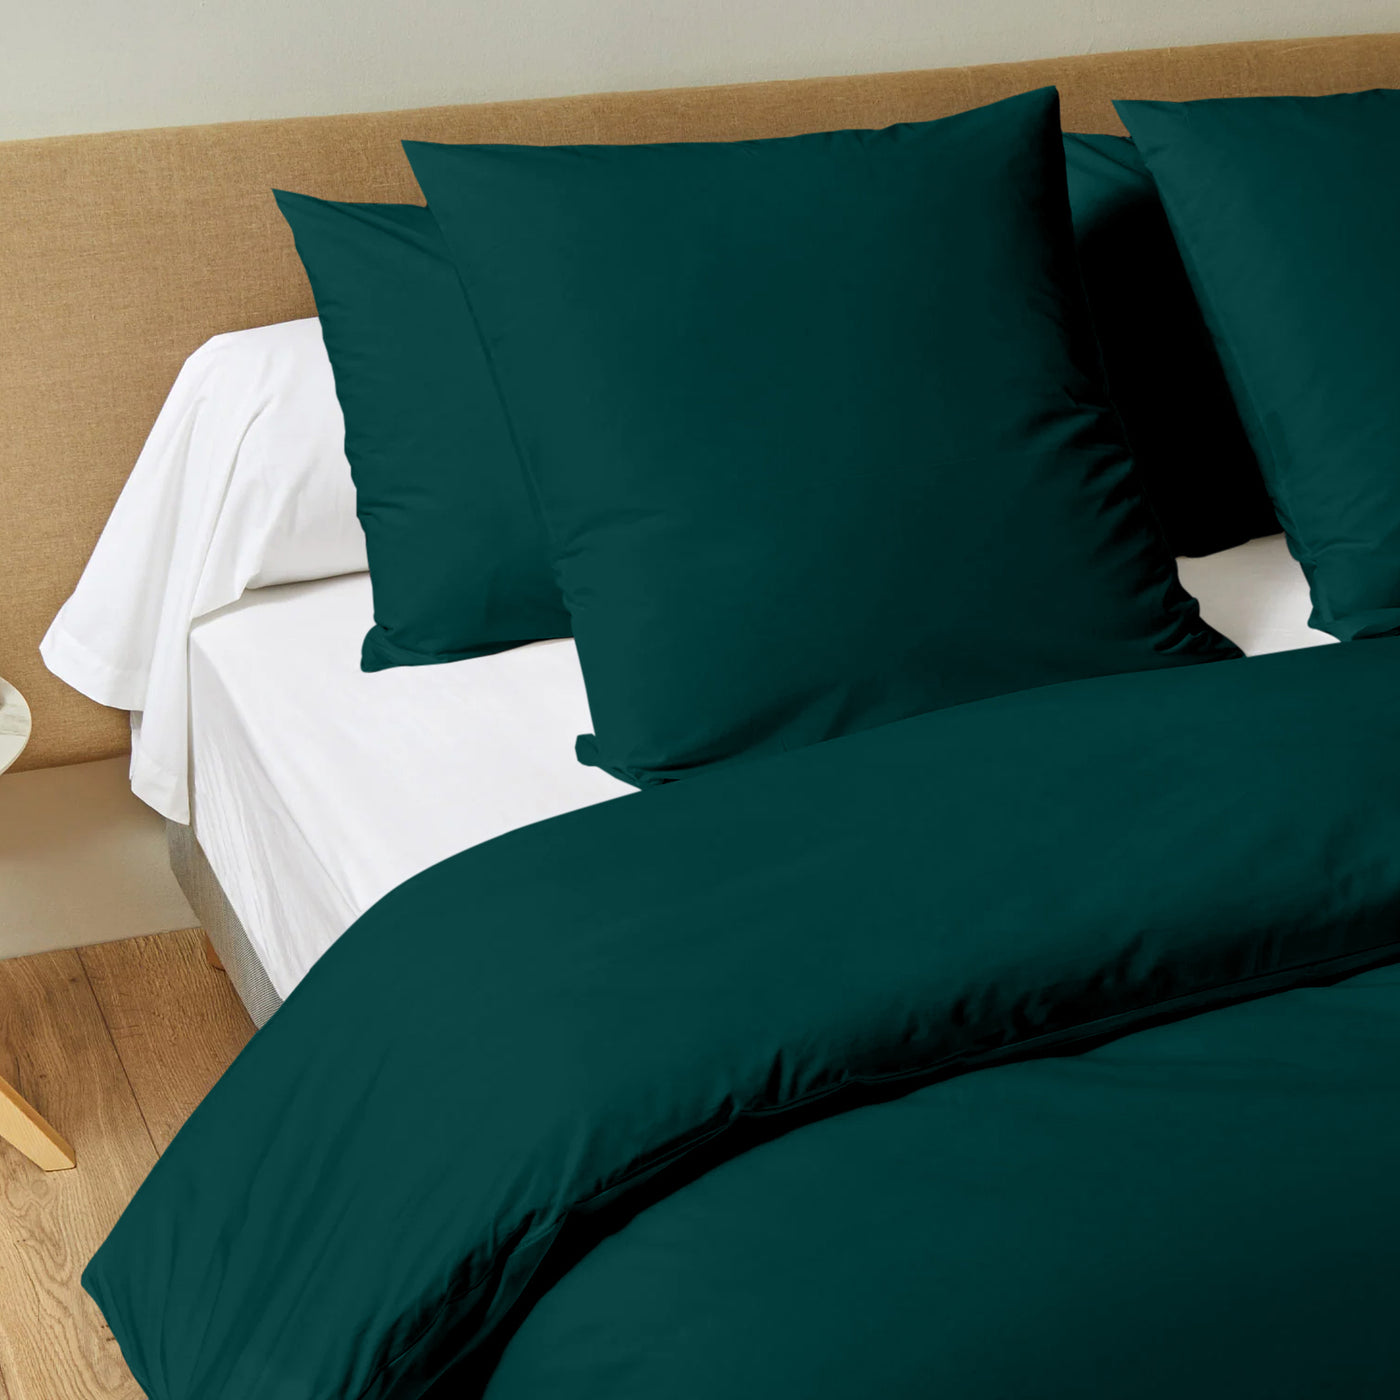 Solid 300 TC Egyptian Cotton Duvet Cover Set - Teal